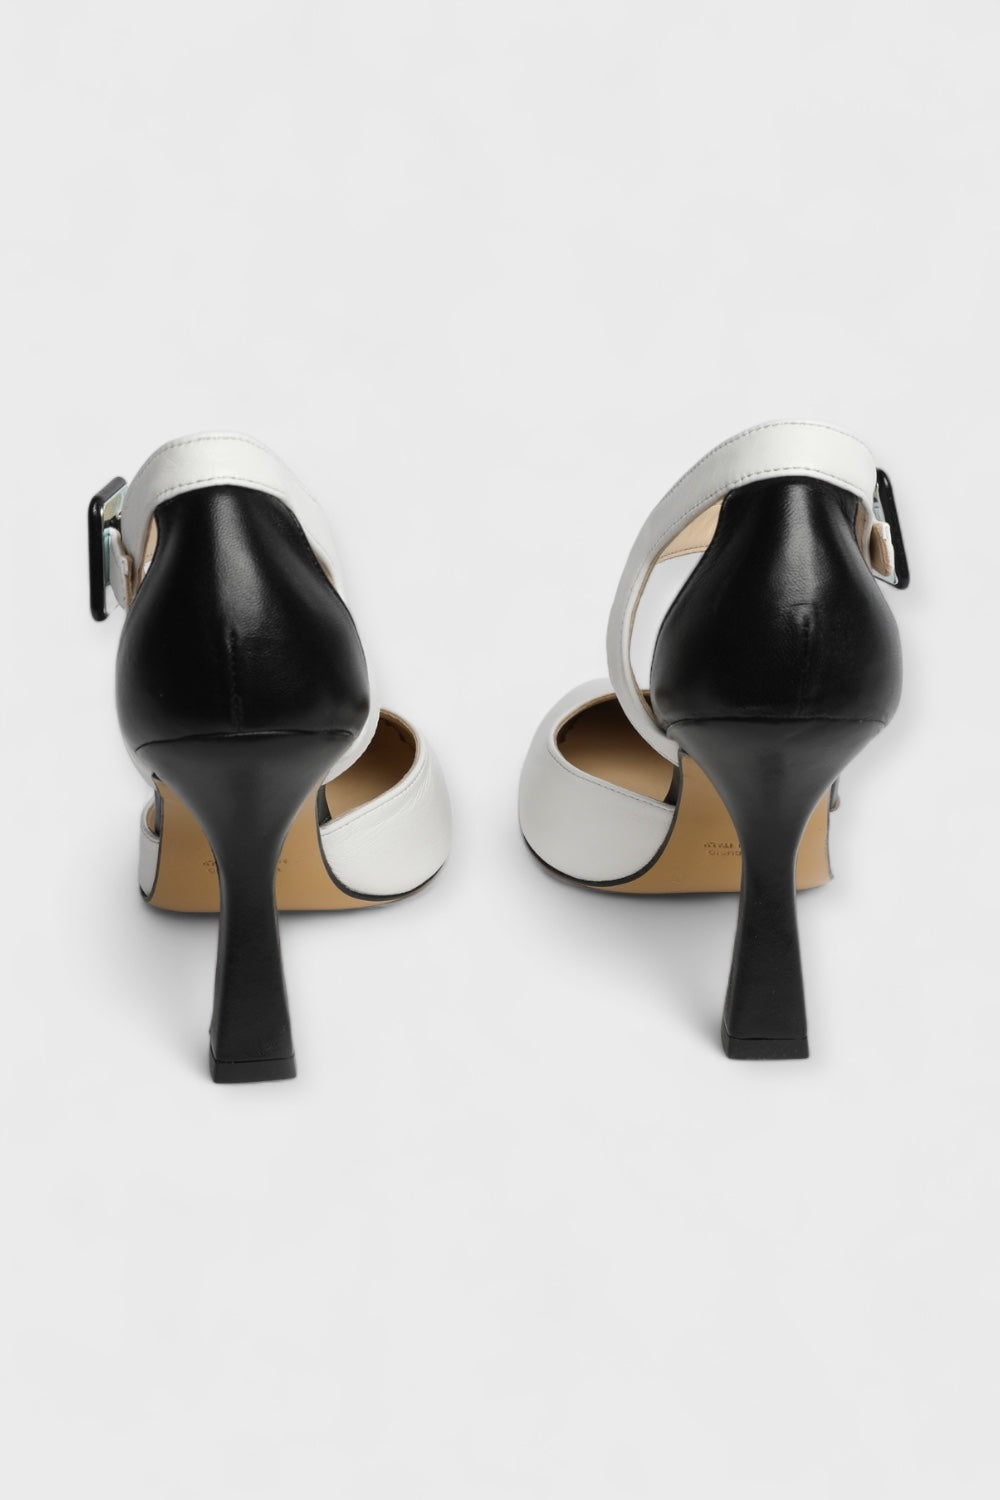 Gatsby Black & White Ankle Strap Pumps by Marco Cinosi Italian Women's Shoes